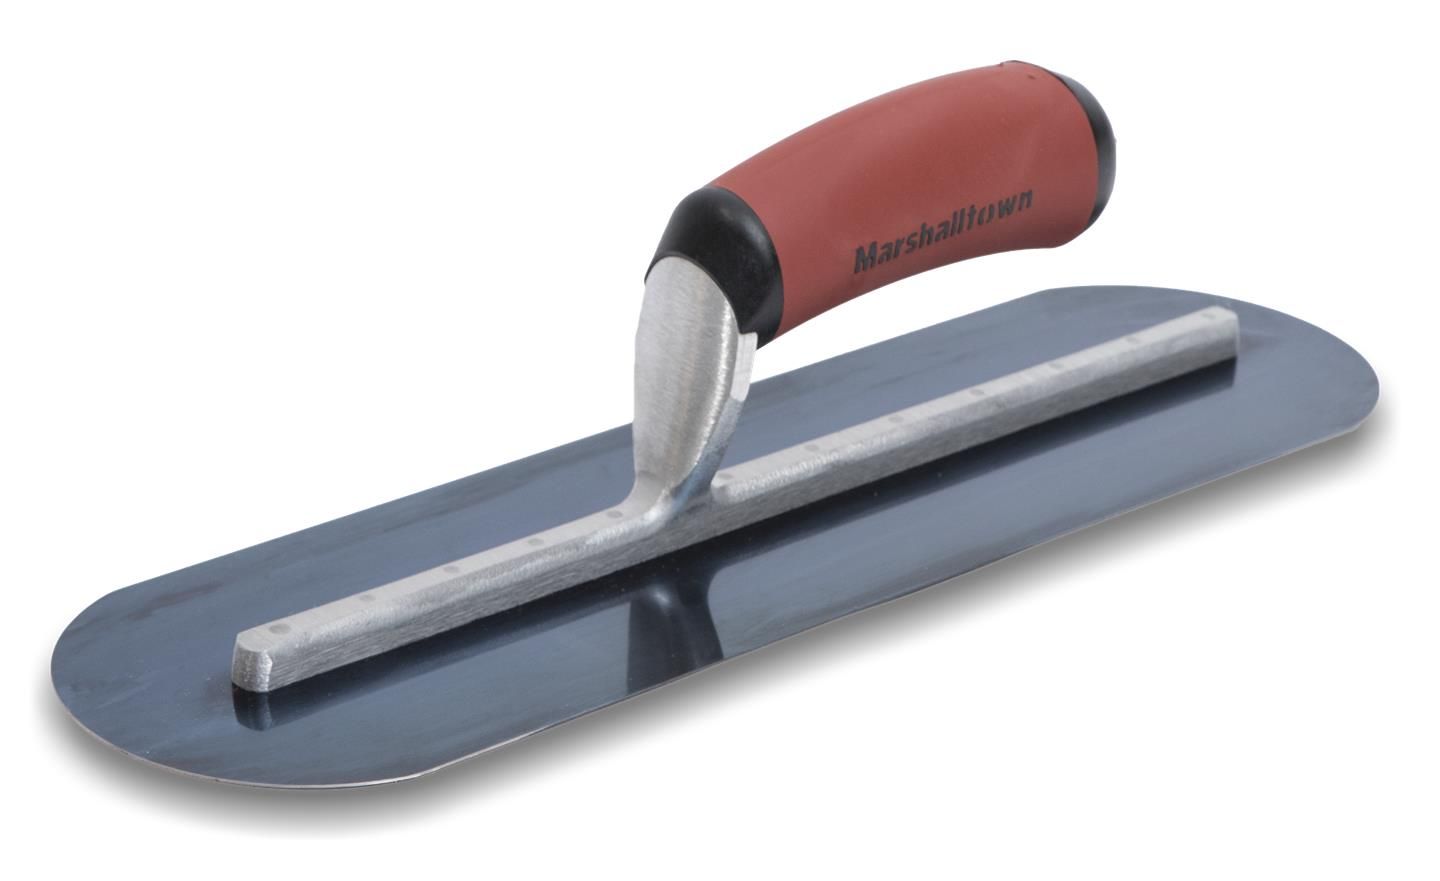 16" X 4" ROUNDED FRONT FINISHING TROWEL